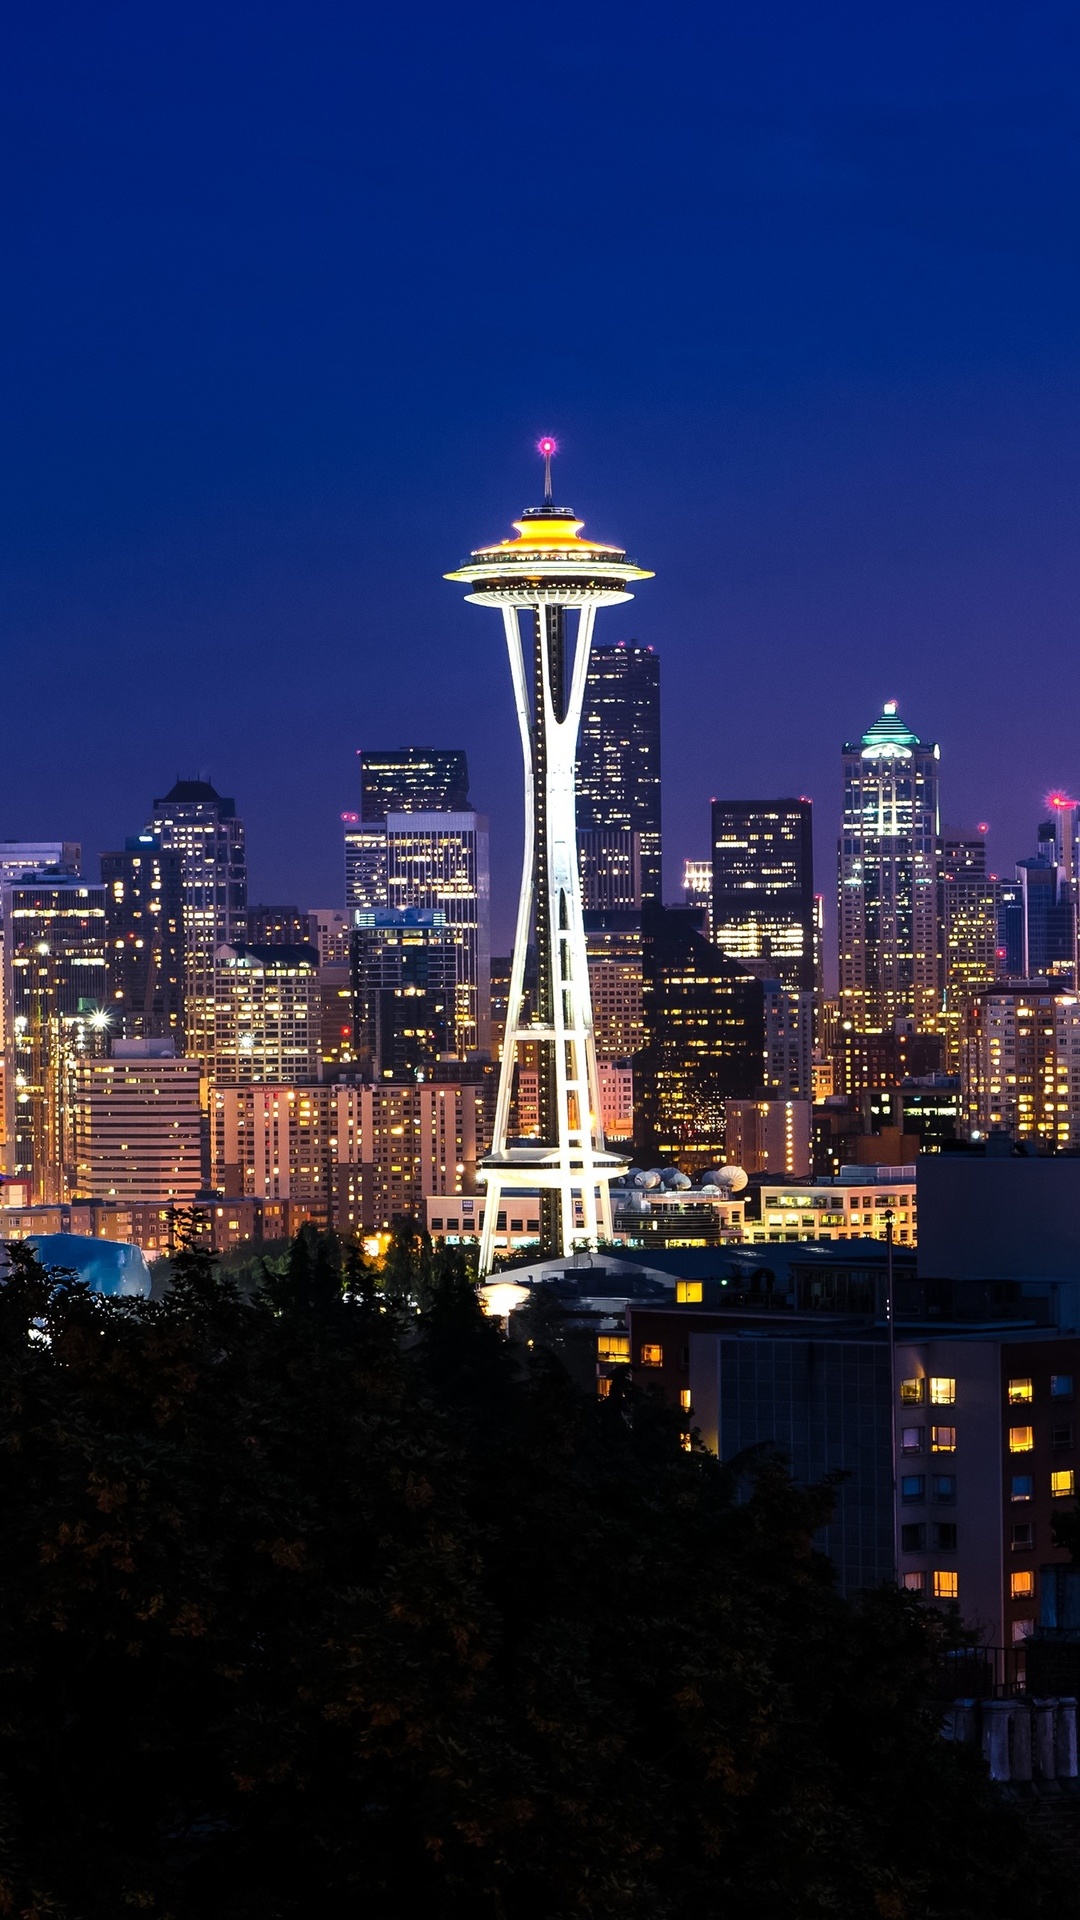 HD wallpaper, 4K Wallpapers, 1080X1920 Full Hd Phone, High Resolution Beauty, Samsung Full Hd Seattle Skyline Background Image, Seattle At Its Finest, Seattle Skyline